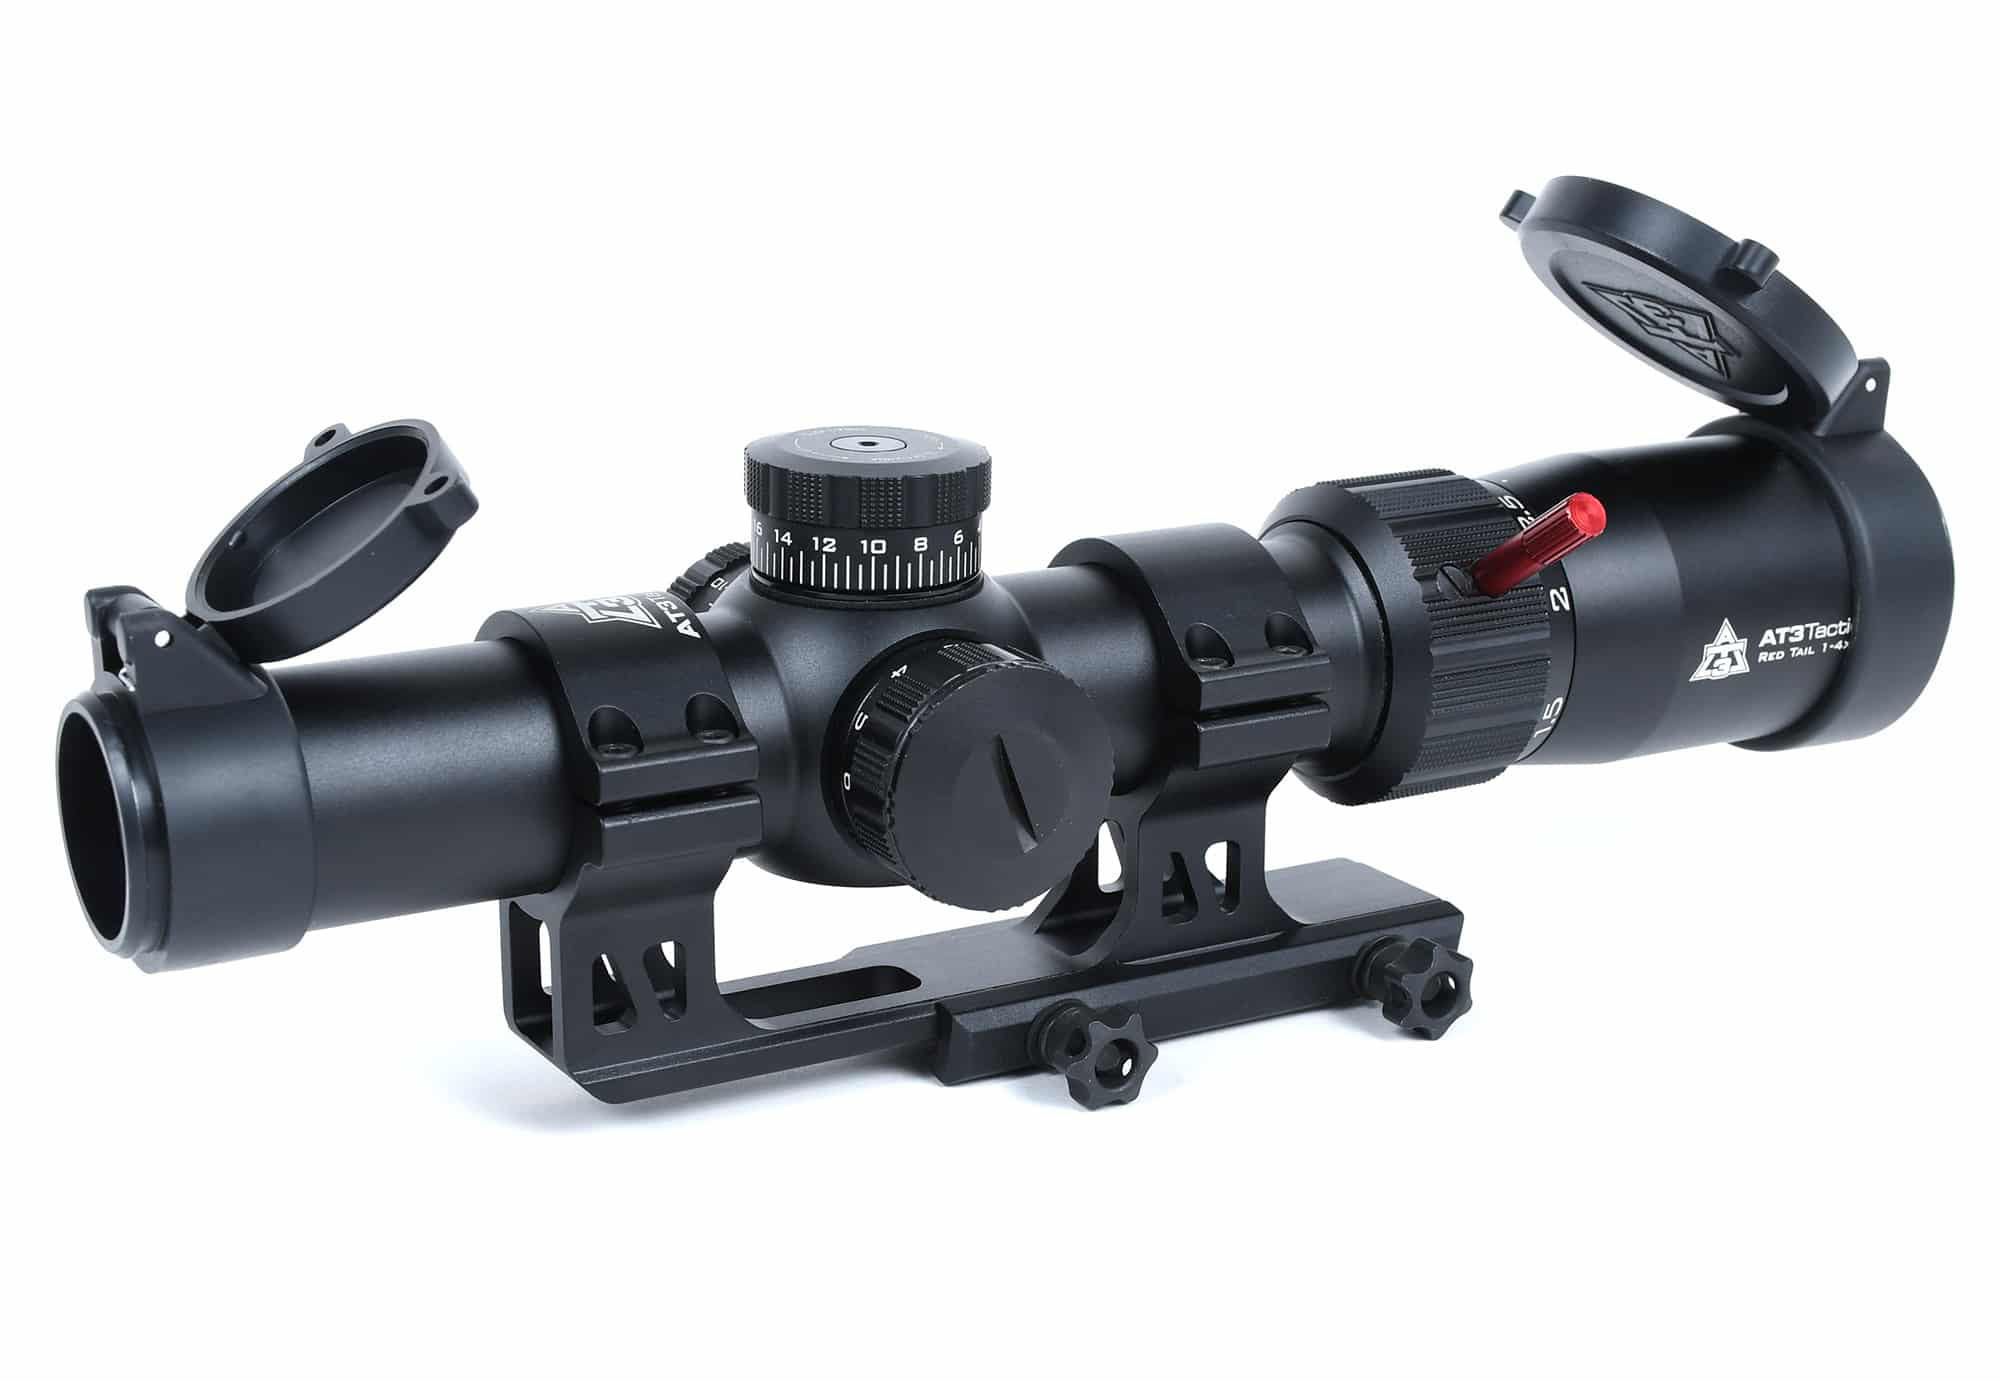 File scope. Винтовка с оптикой. Mepro Hunter Sniper's Night Vision Weapon Sight with x4 or x6 Magnification..